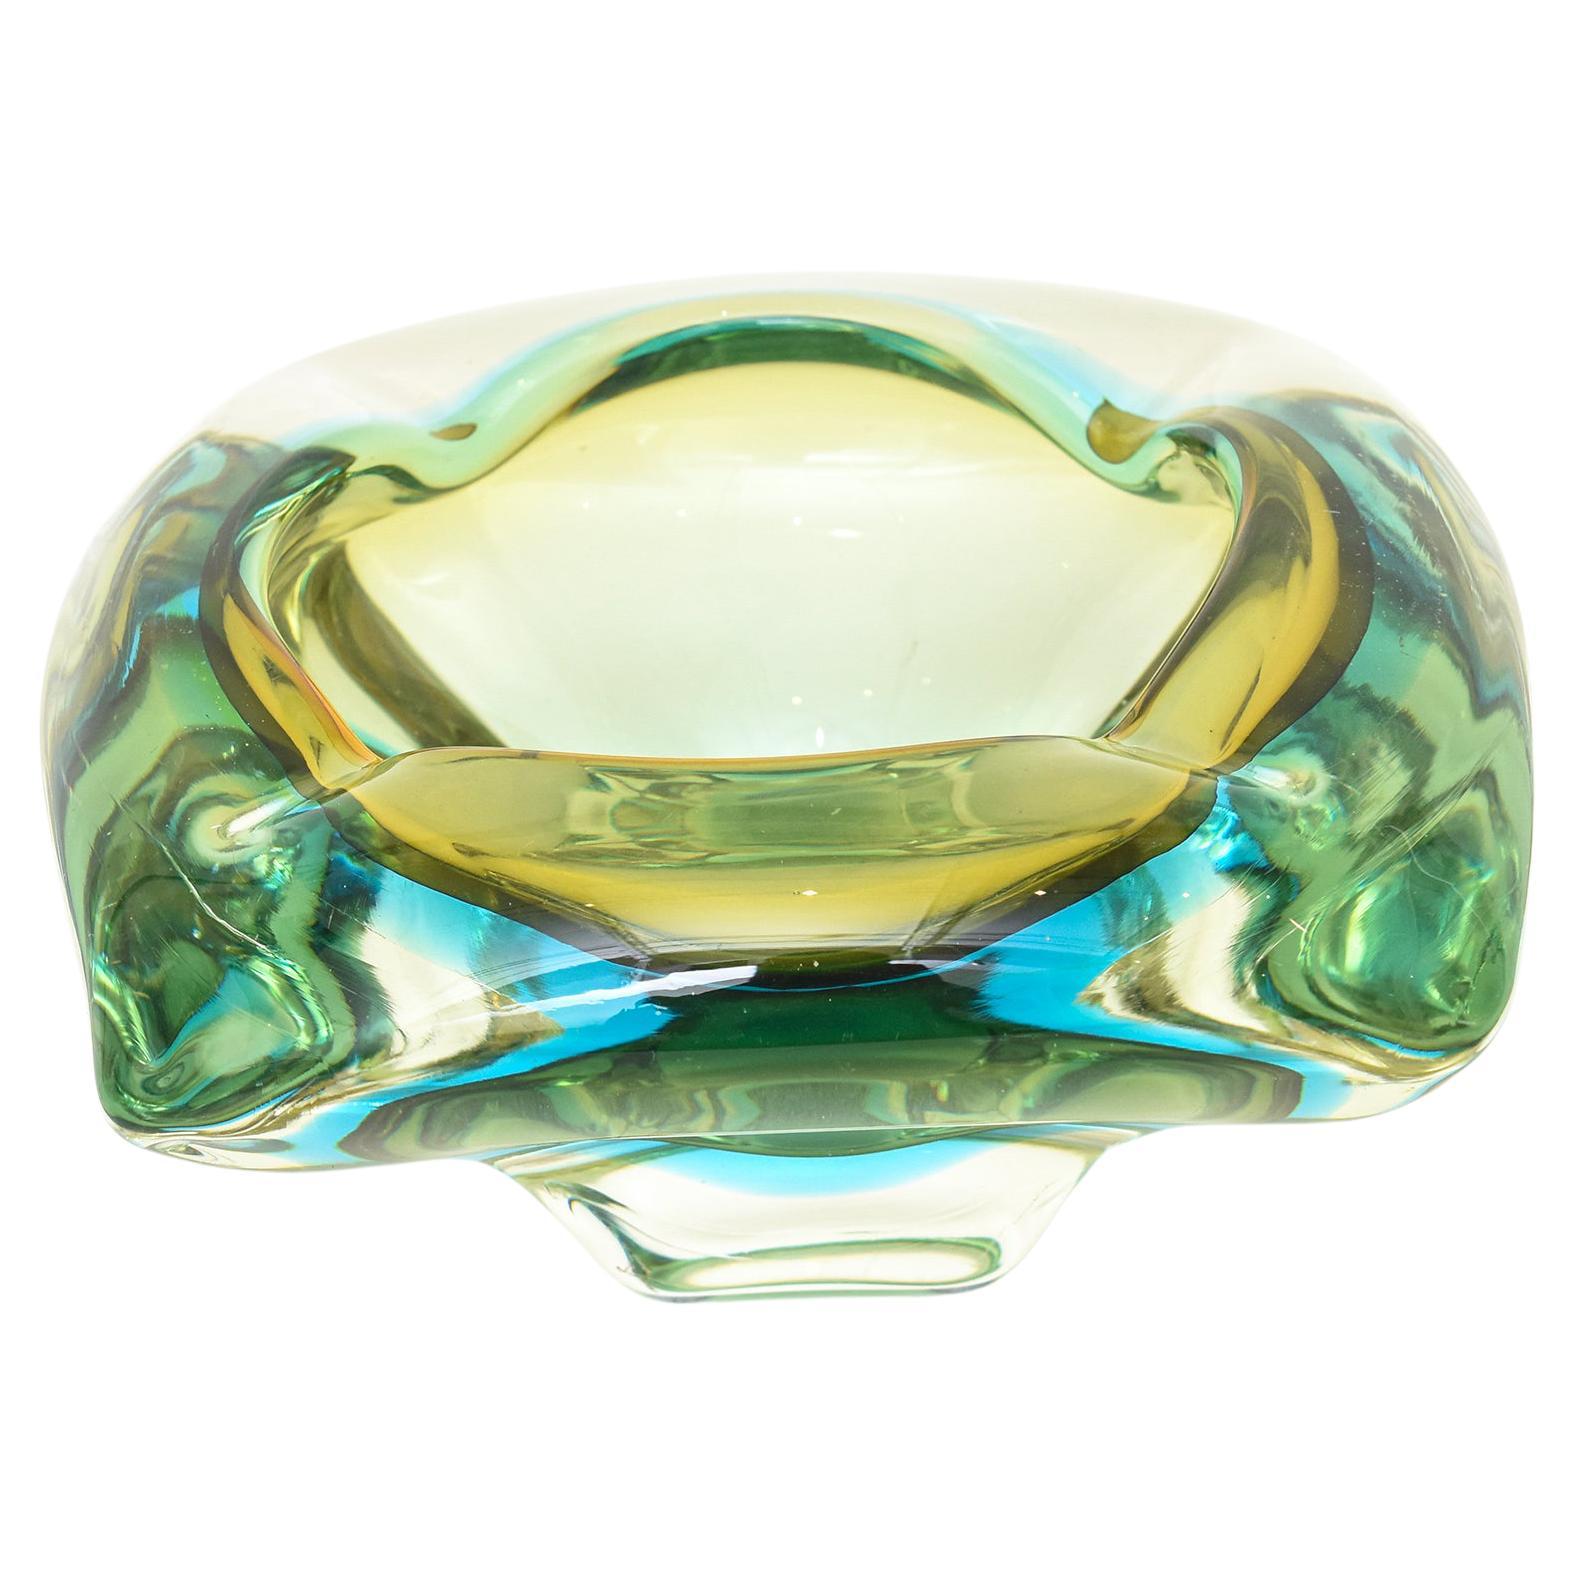 Flavio Poli Murano Sommerso Turquoise and Green Glass Bowl / Ashtray Vintage For Sale